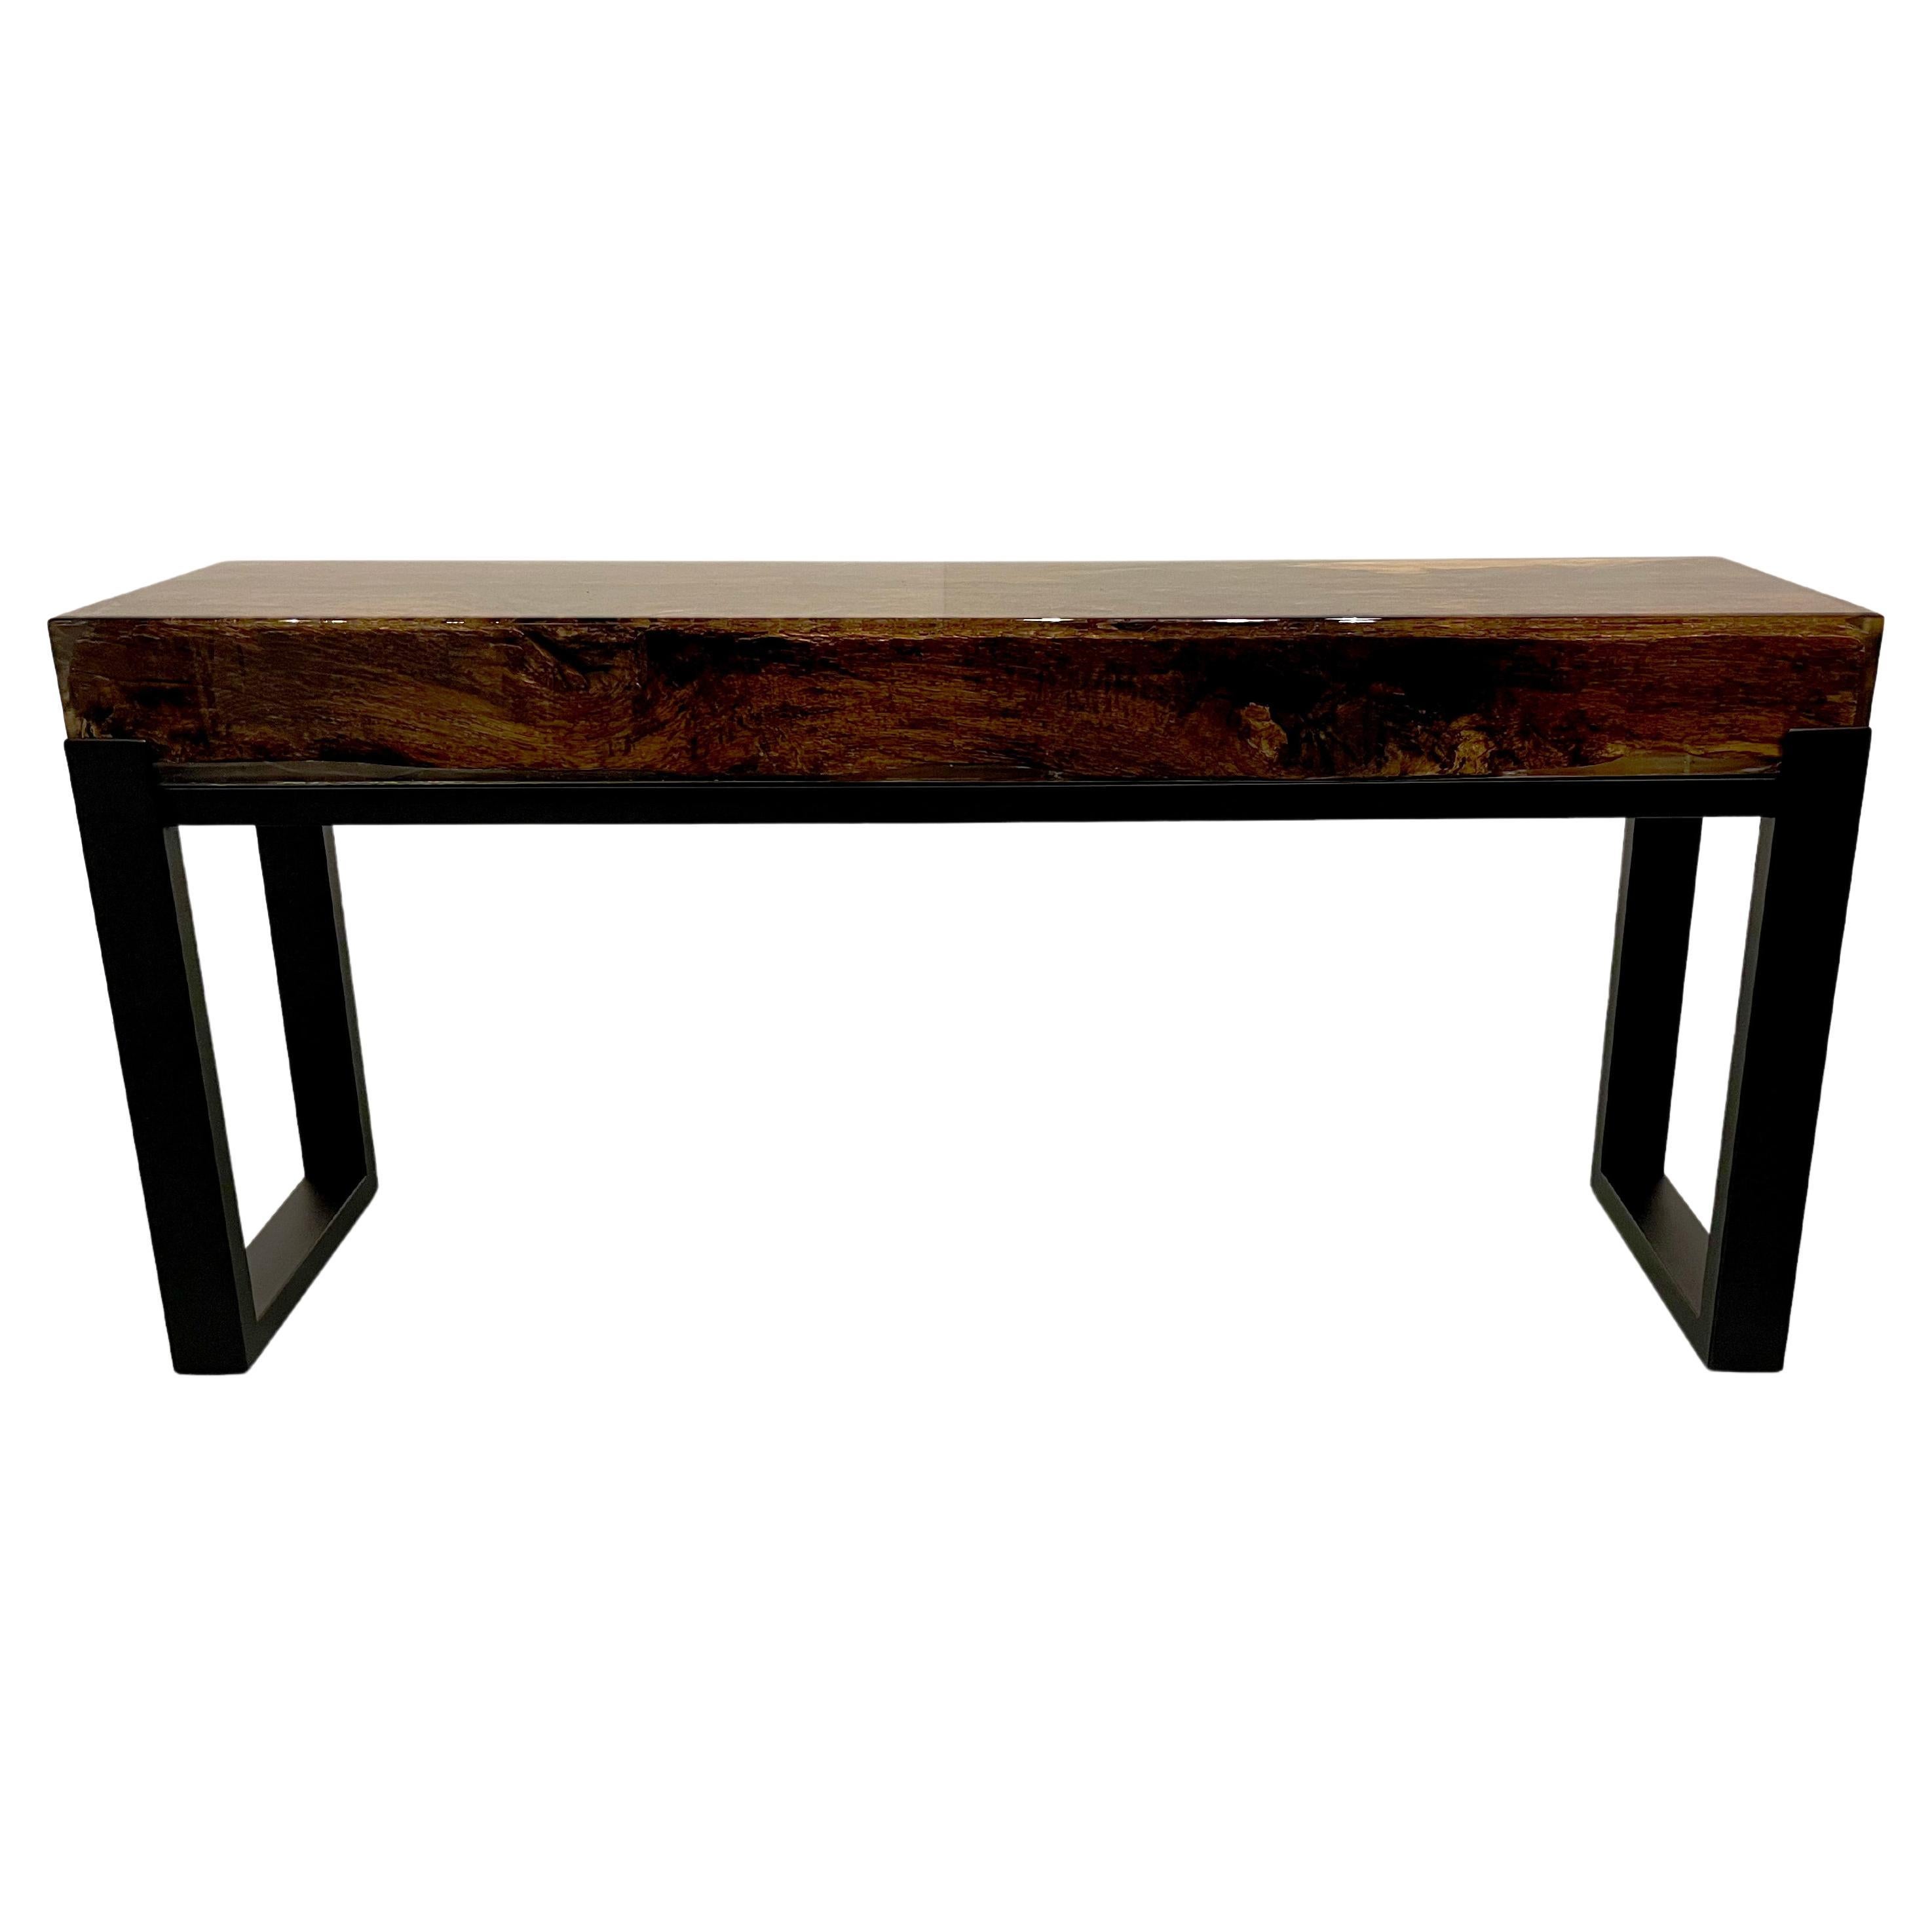 Side Table Made of Oak Wooden Beam, Cast in Epoxy, on a Steel Frame For Sale